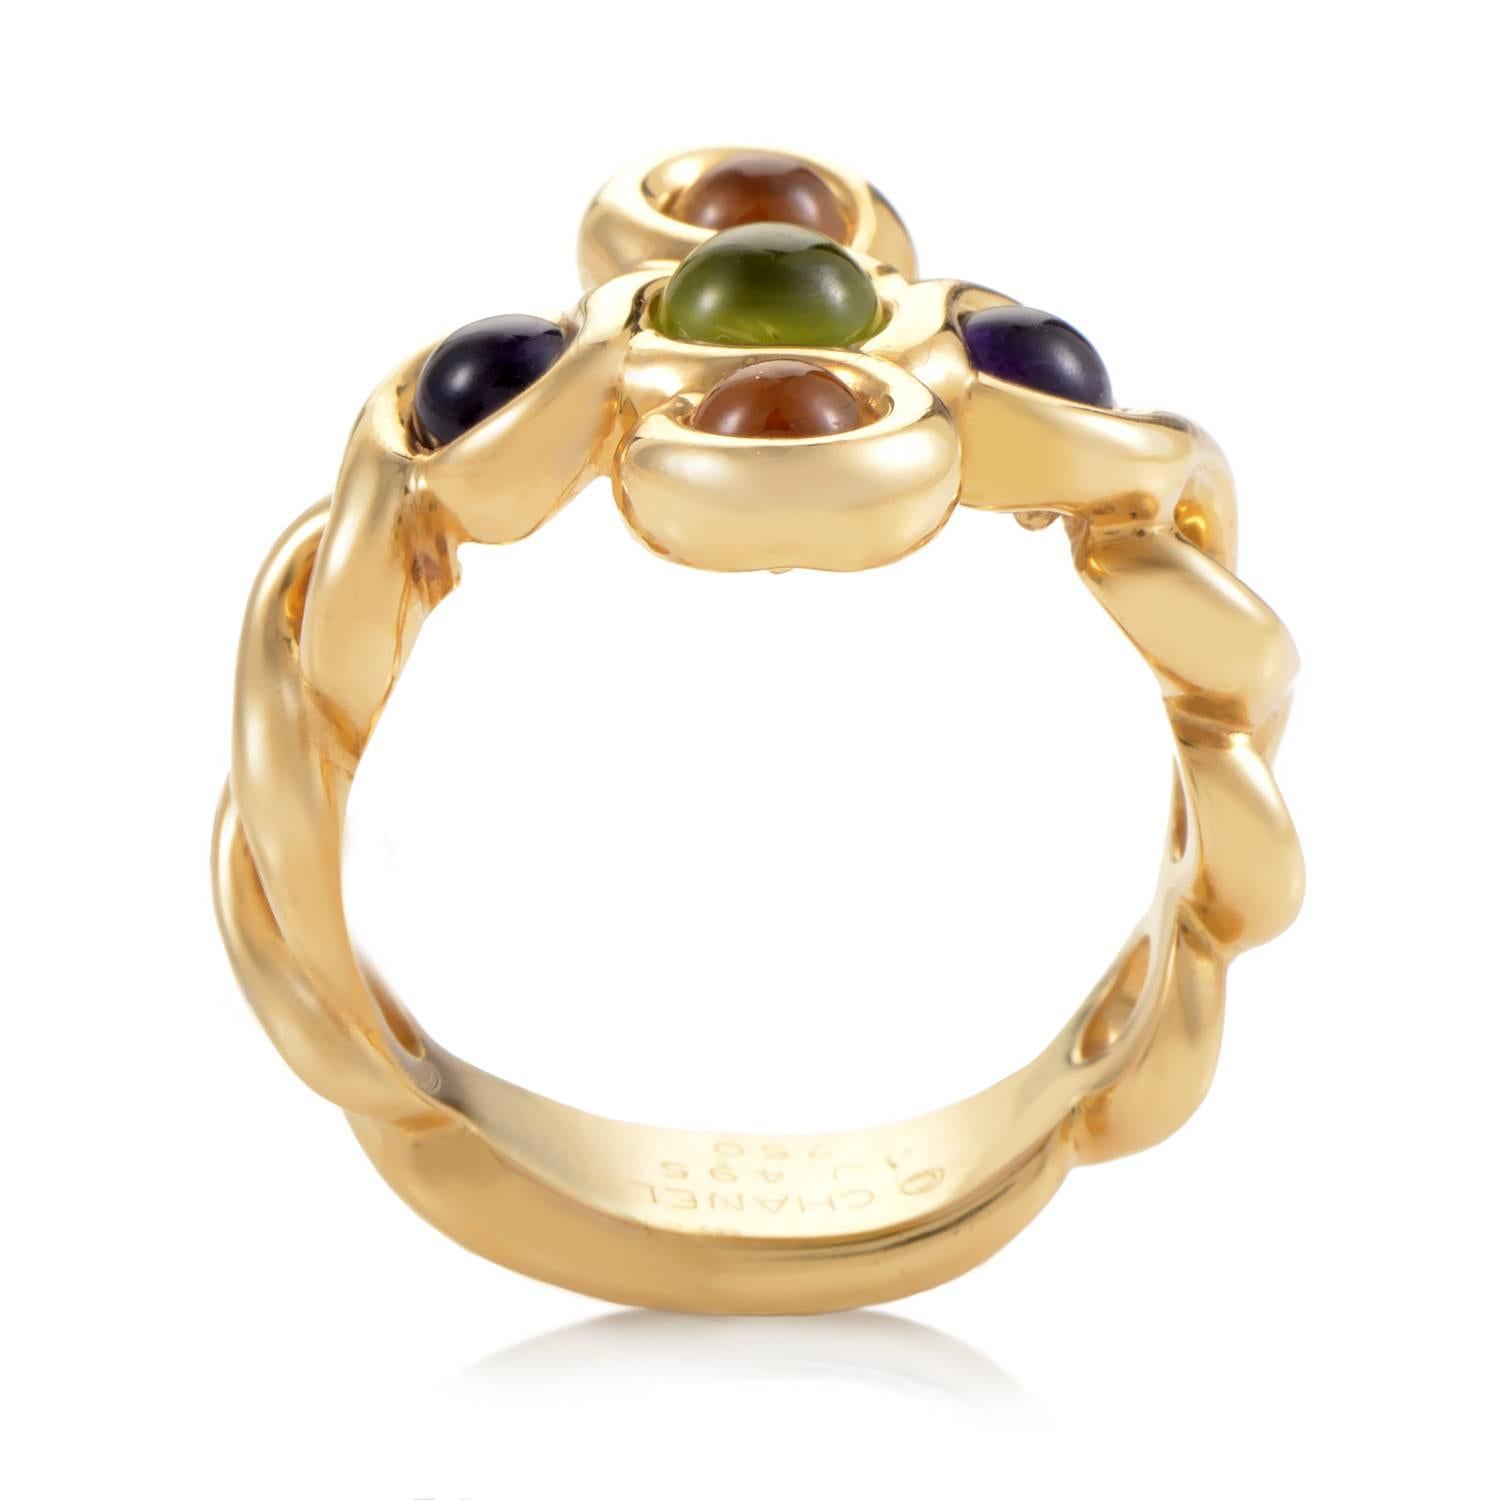 An array of hues are granted space and light in which to play across the crown of this gorgeous ring from Chanel. Purple, green and golden stones nestle comfortably in the pillow of 18K Yellow Gold that twists and falls into a bold band. Texture and